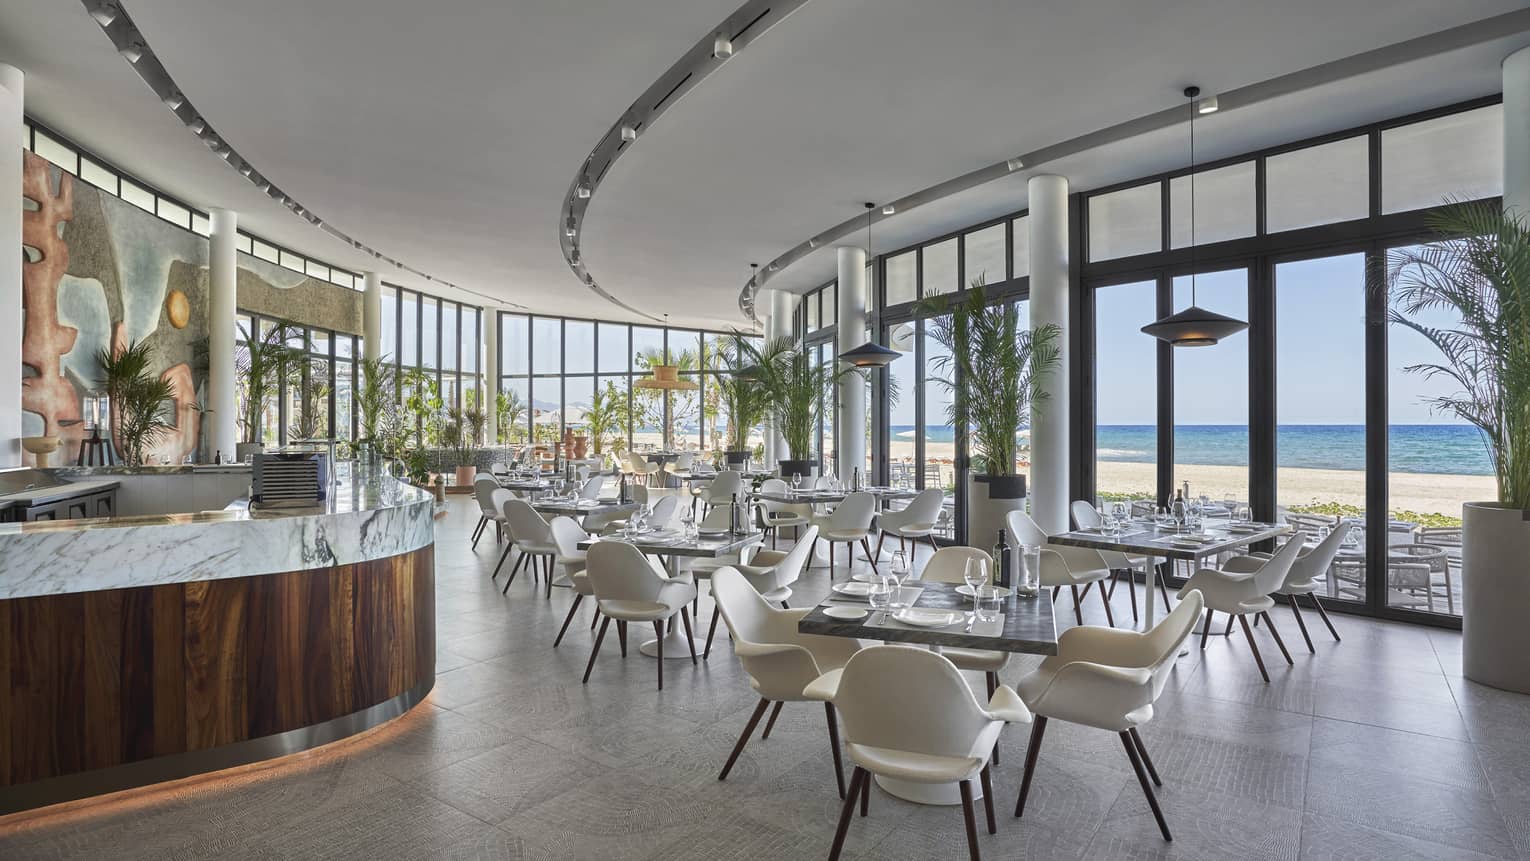 Milos contemporary curved dining room with square tables and white chairs, water views